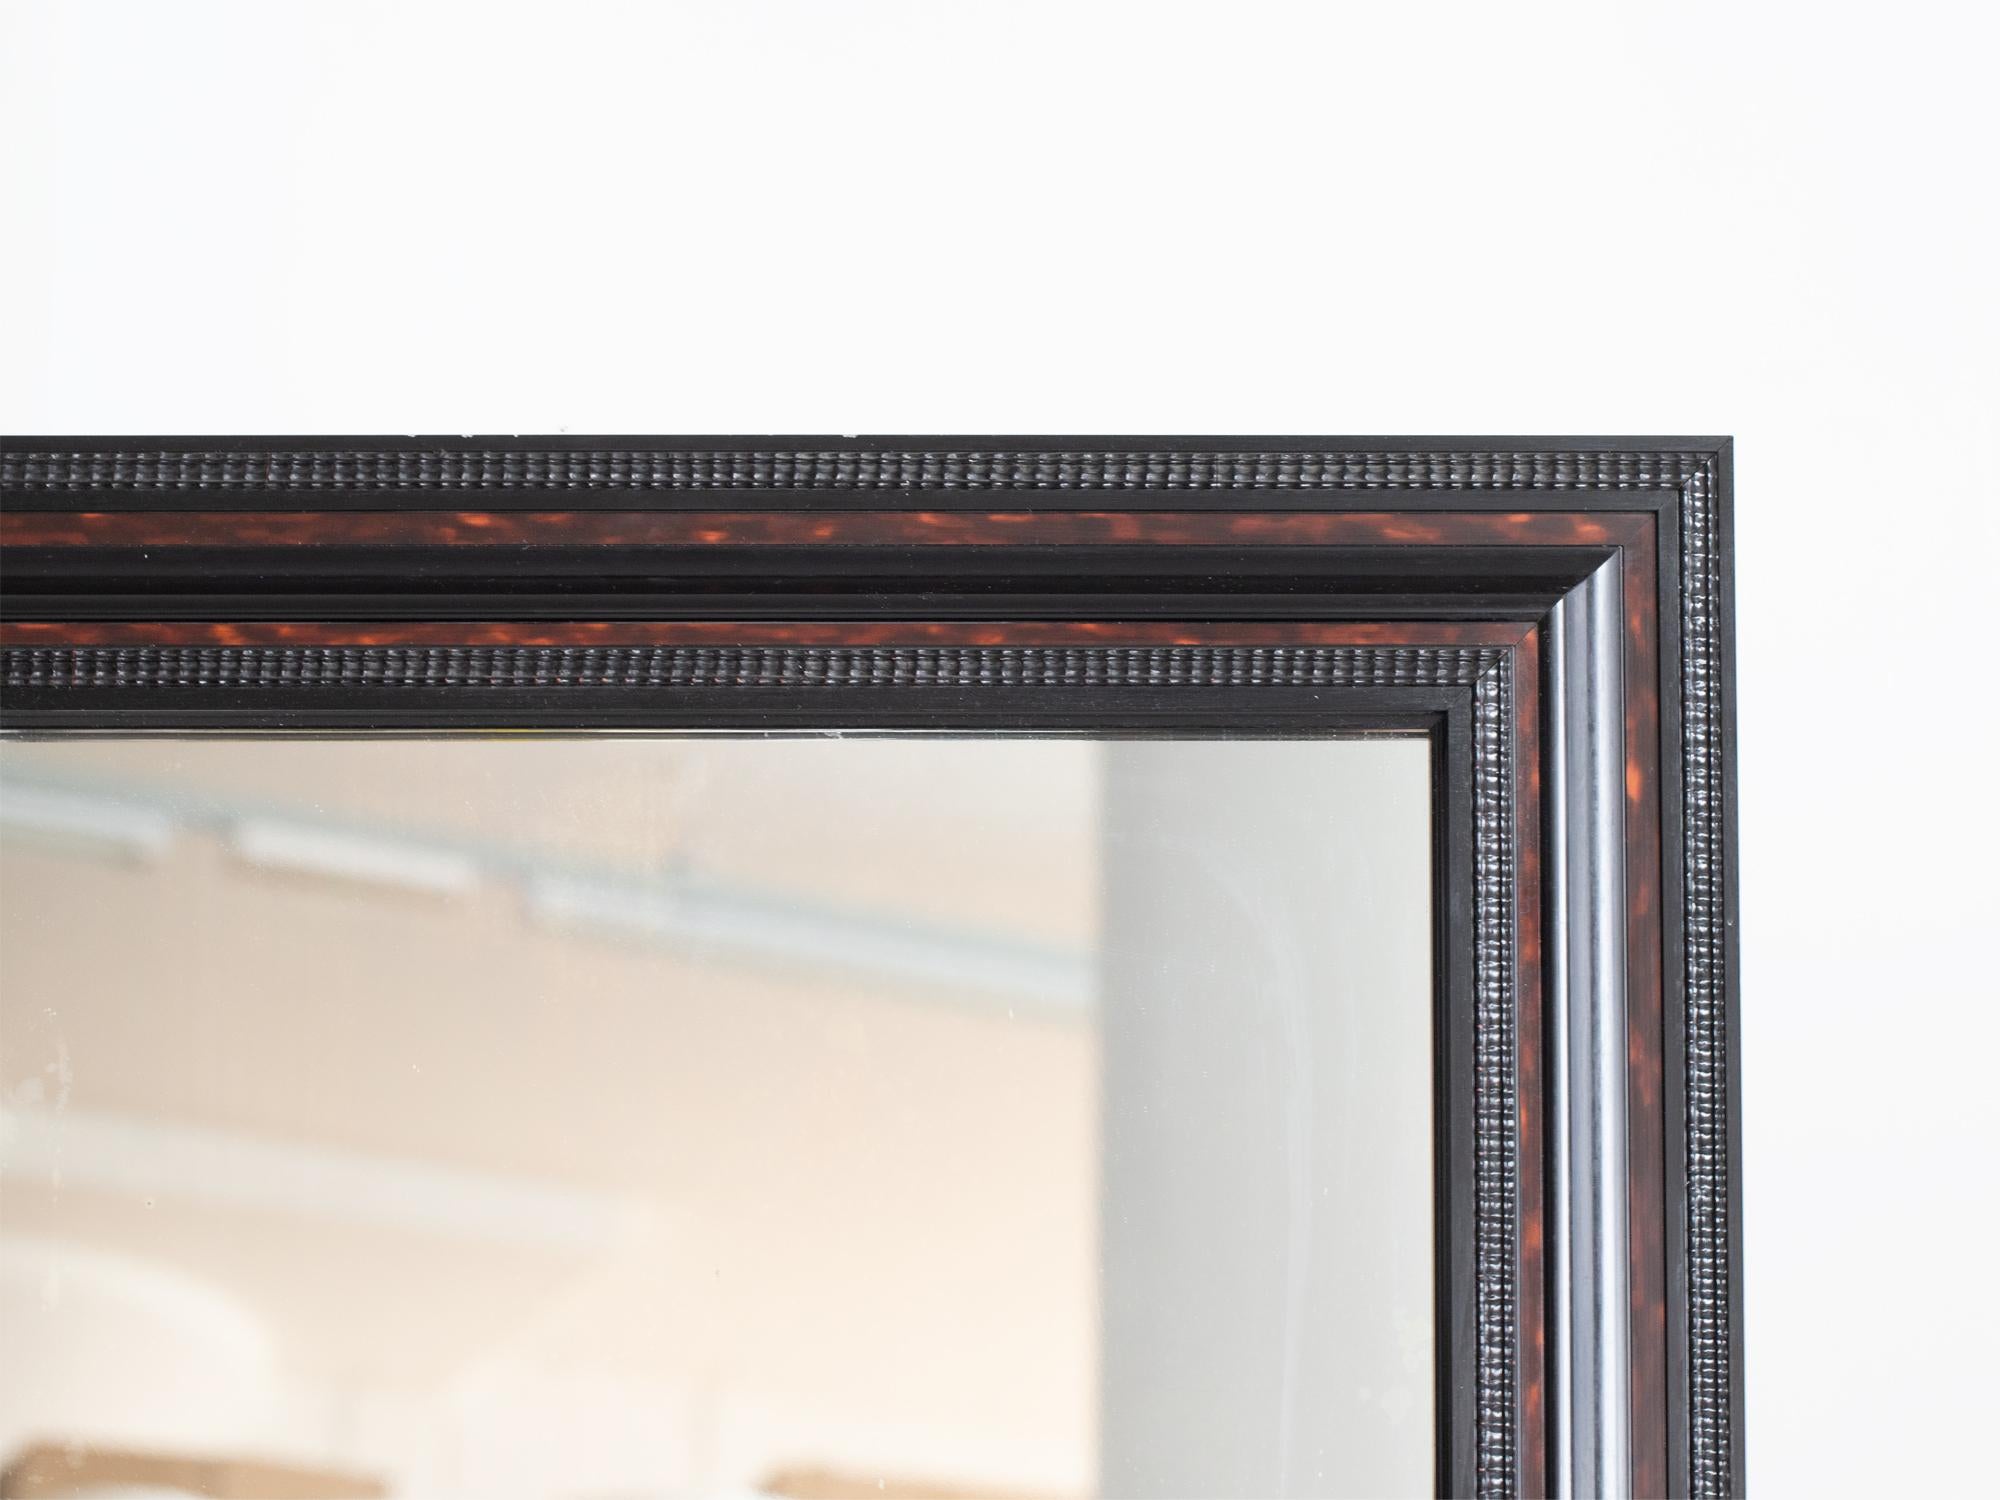 A faux tortoiseshell and ebonised ripple mirror. Dutch, 19C.

In very good order with minimal losses. Original plate and backboards.

80 x 65 x 3.5 cm

31.5 x 25.6 x 1.4 